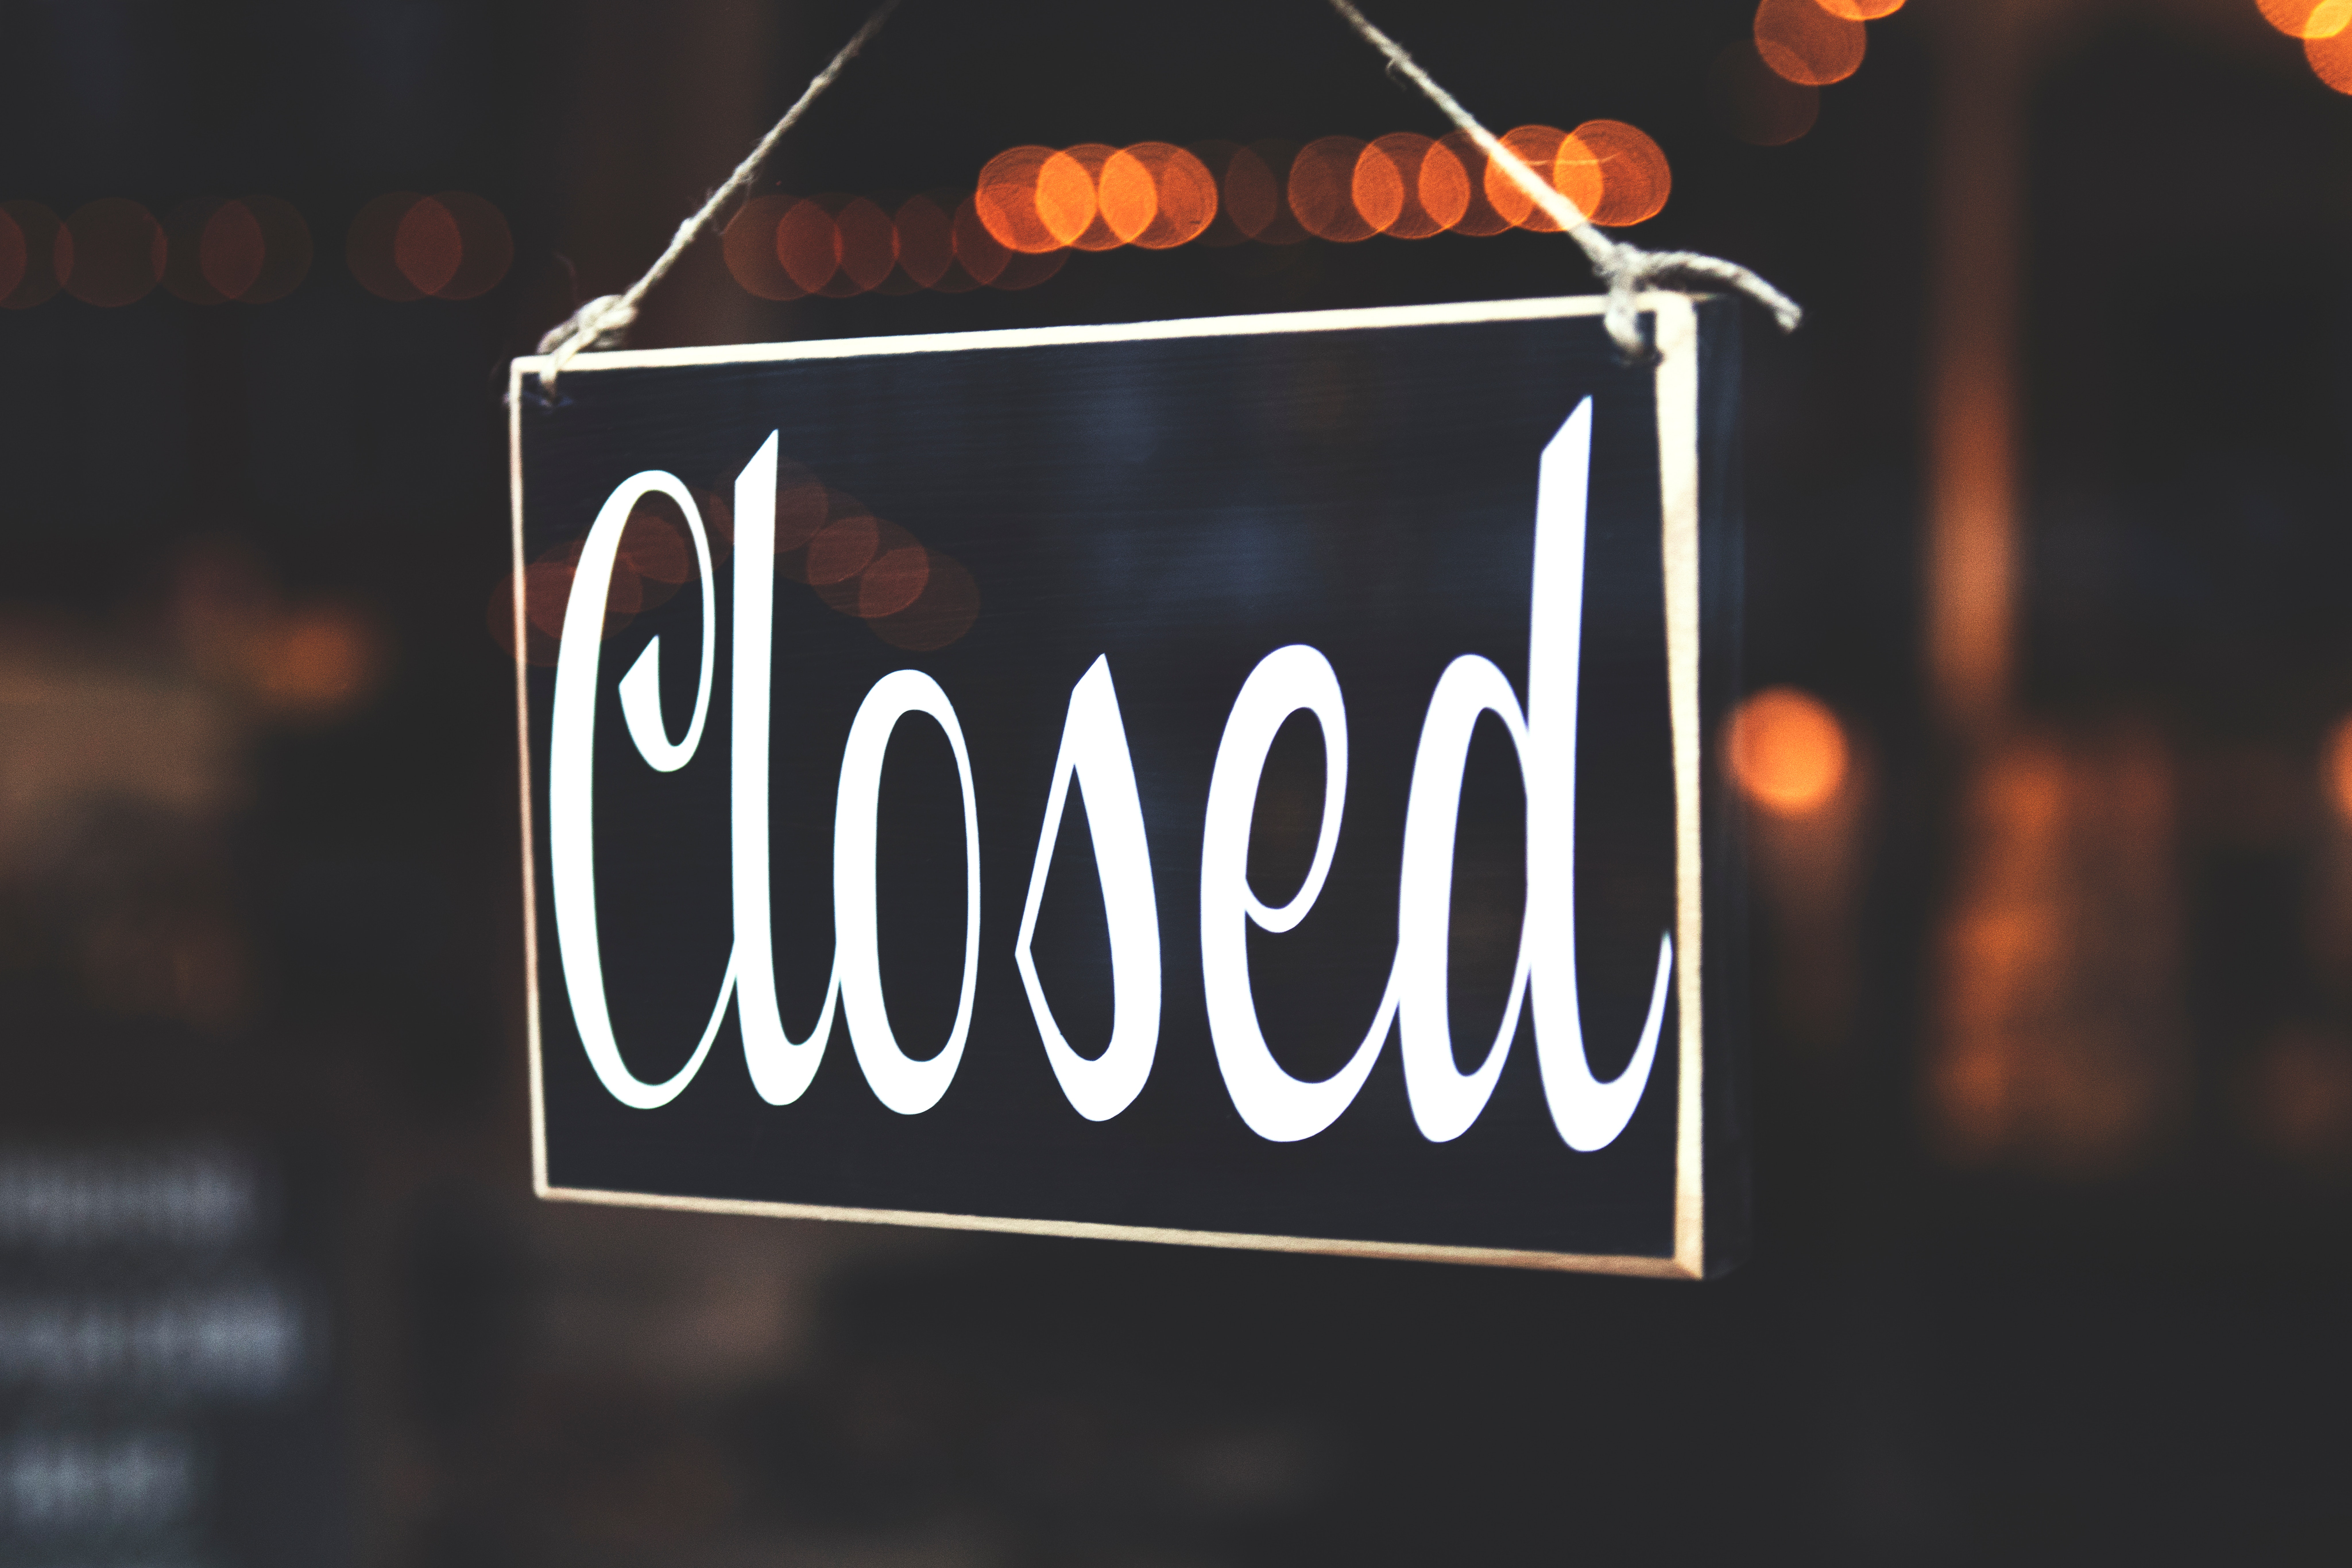 Photo of a sign that reads "closed" in a classy script font with warm lights in the background.